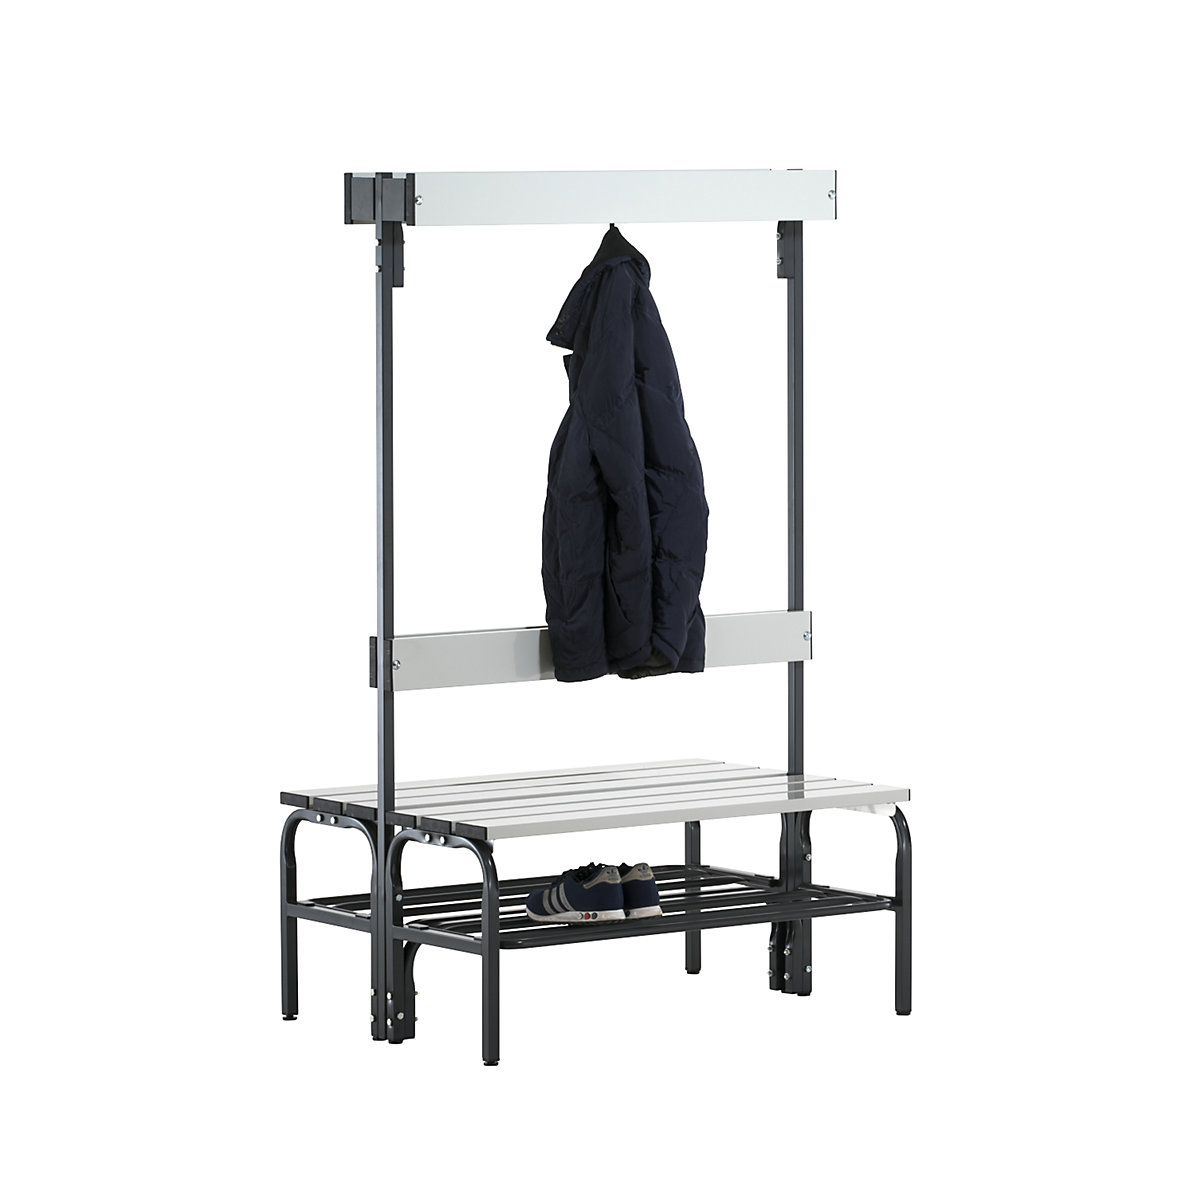 Sypro – Changing room bench made of stainless steel (Product illustration 11)